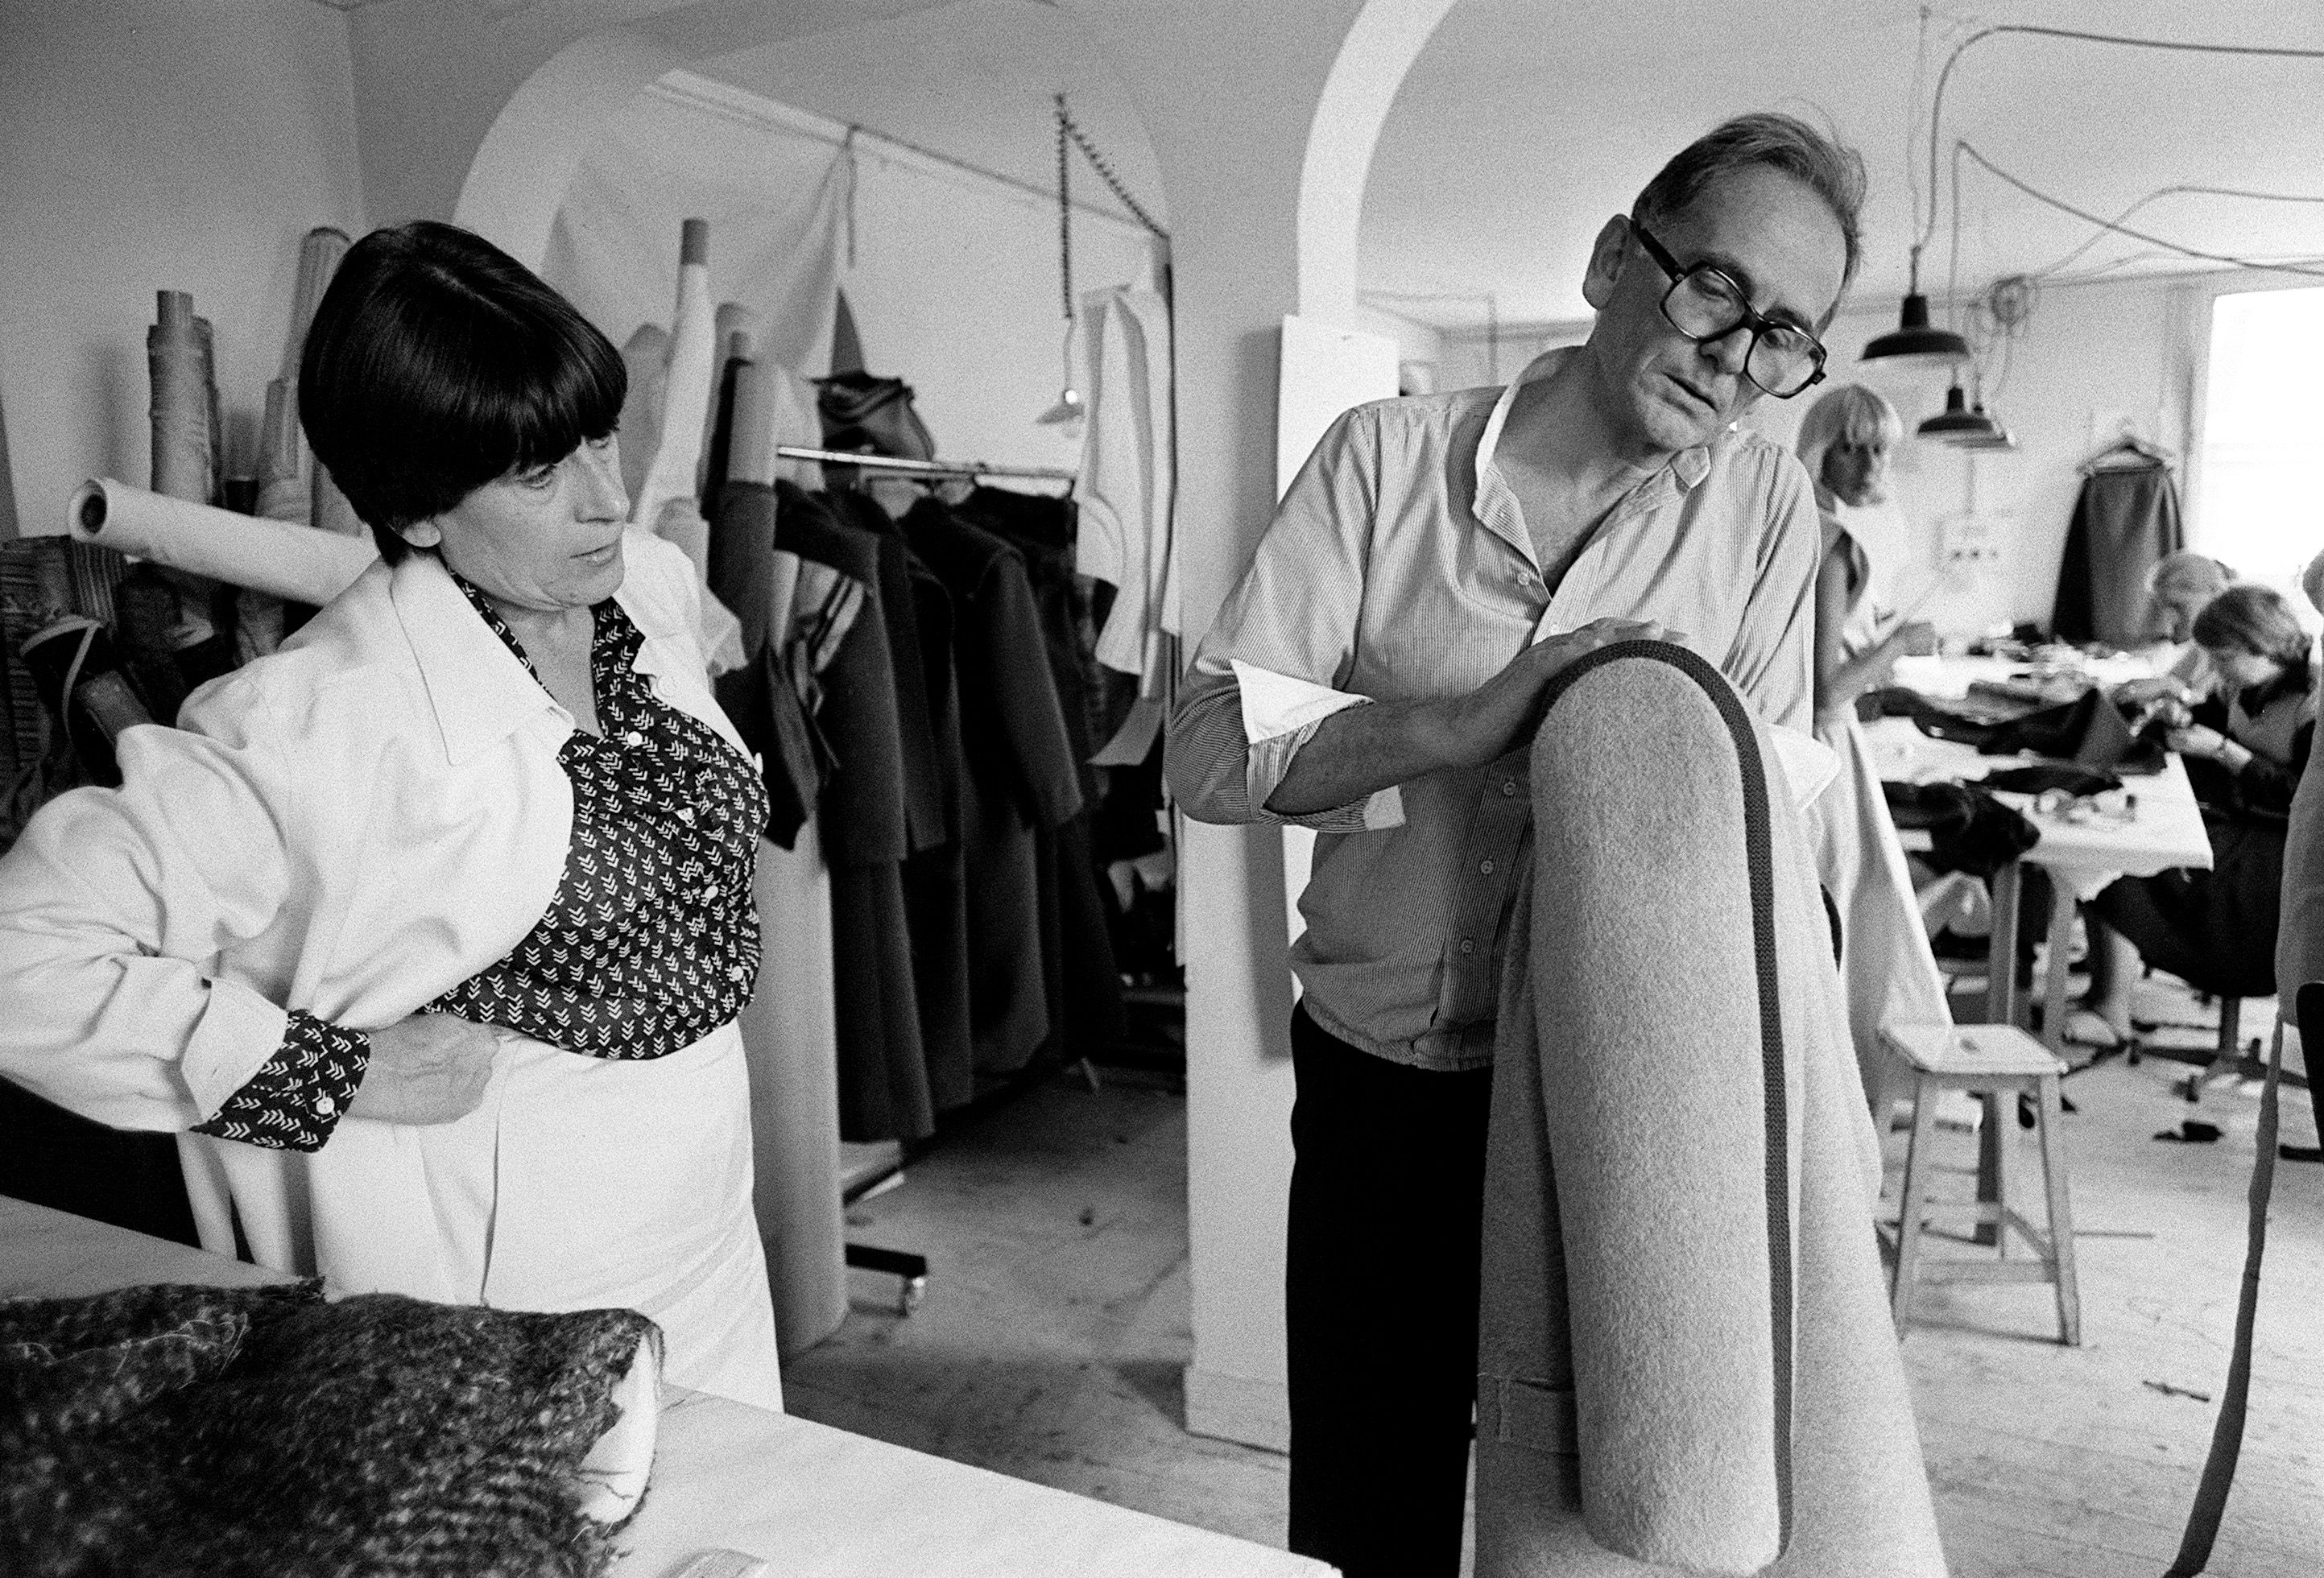 Pierre Cardin Obituary: French Fashion Designer Dies at 98 - Bloomberg